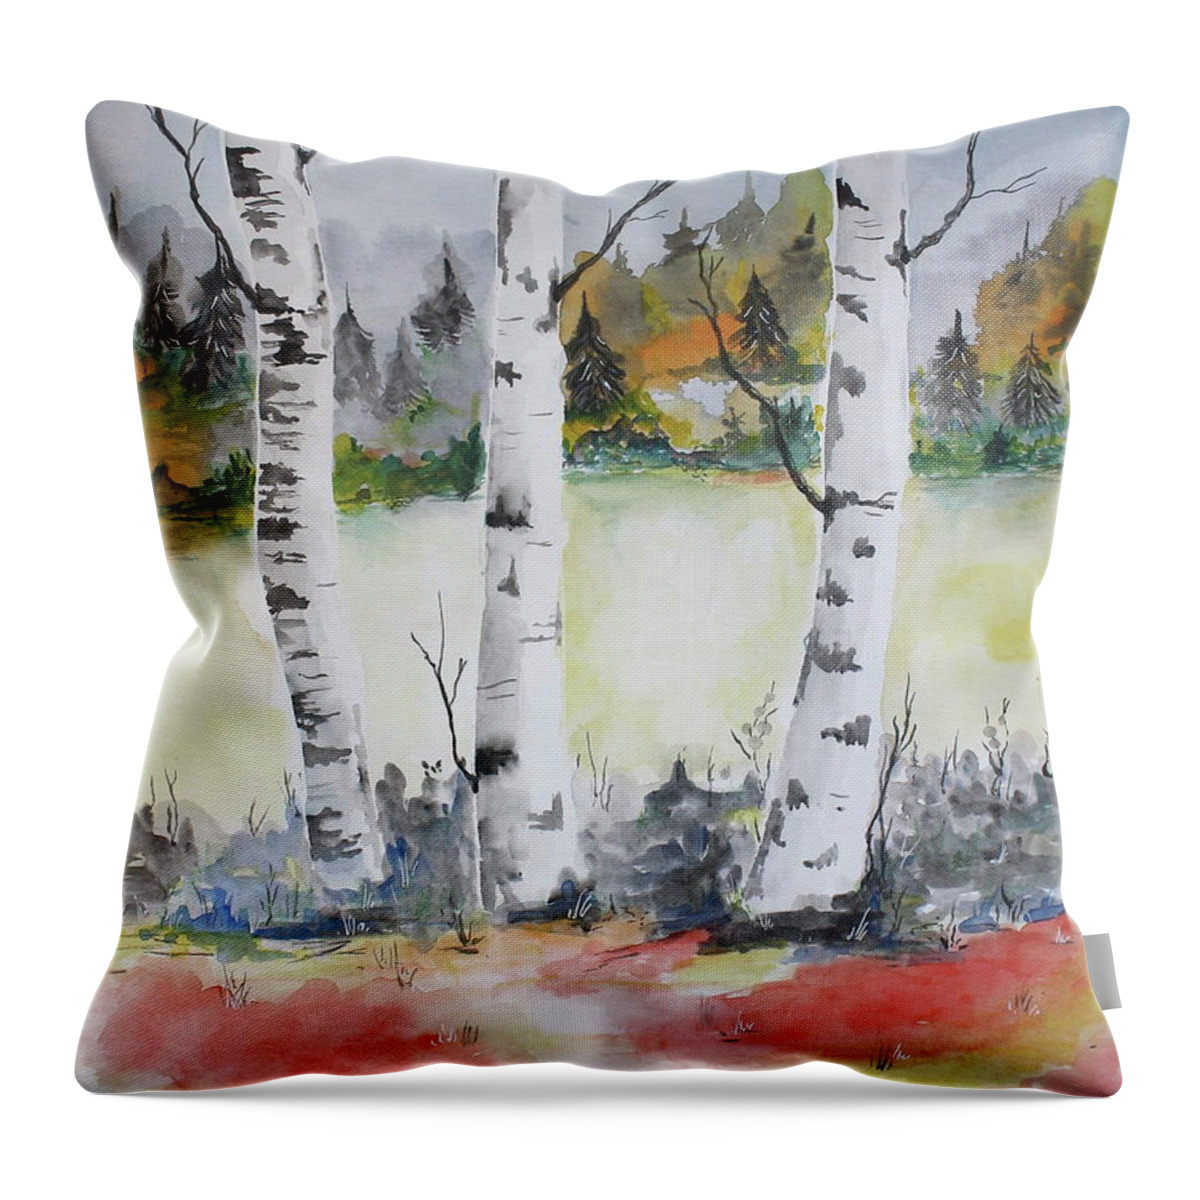 Birch Throw Pillow featuring the painting Birches by Barbara Teller